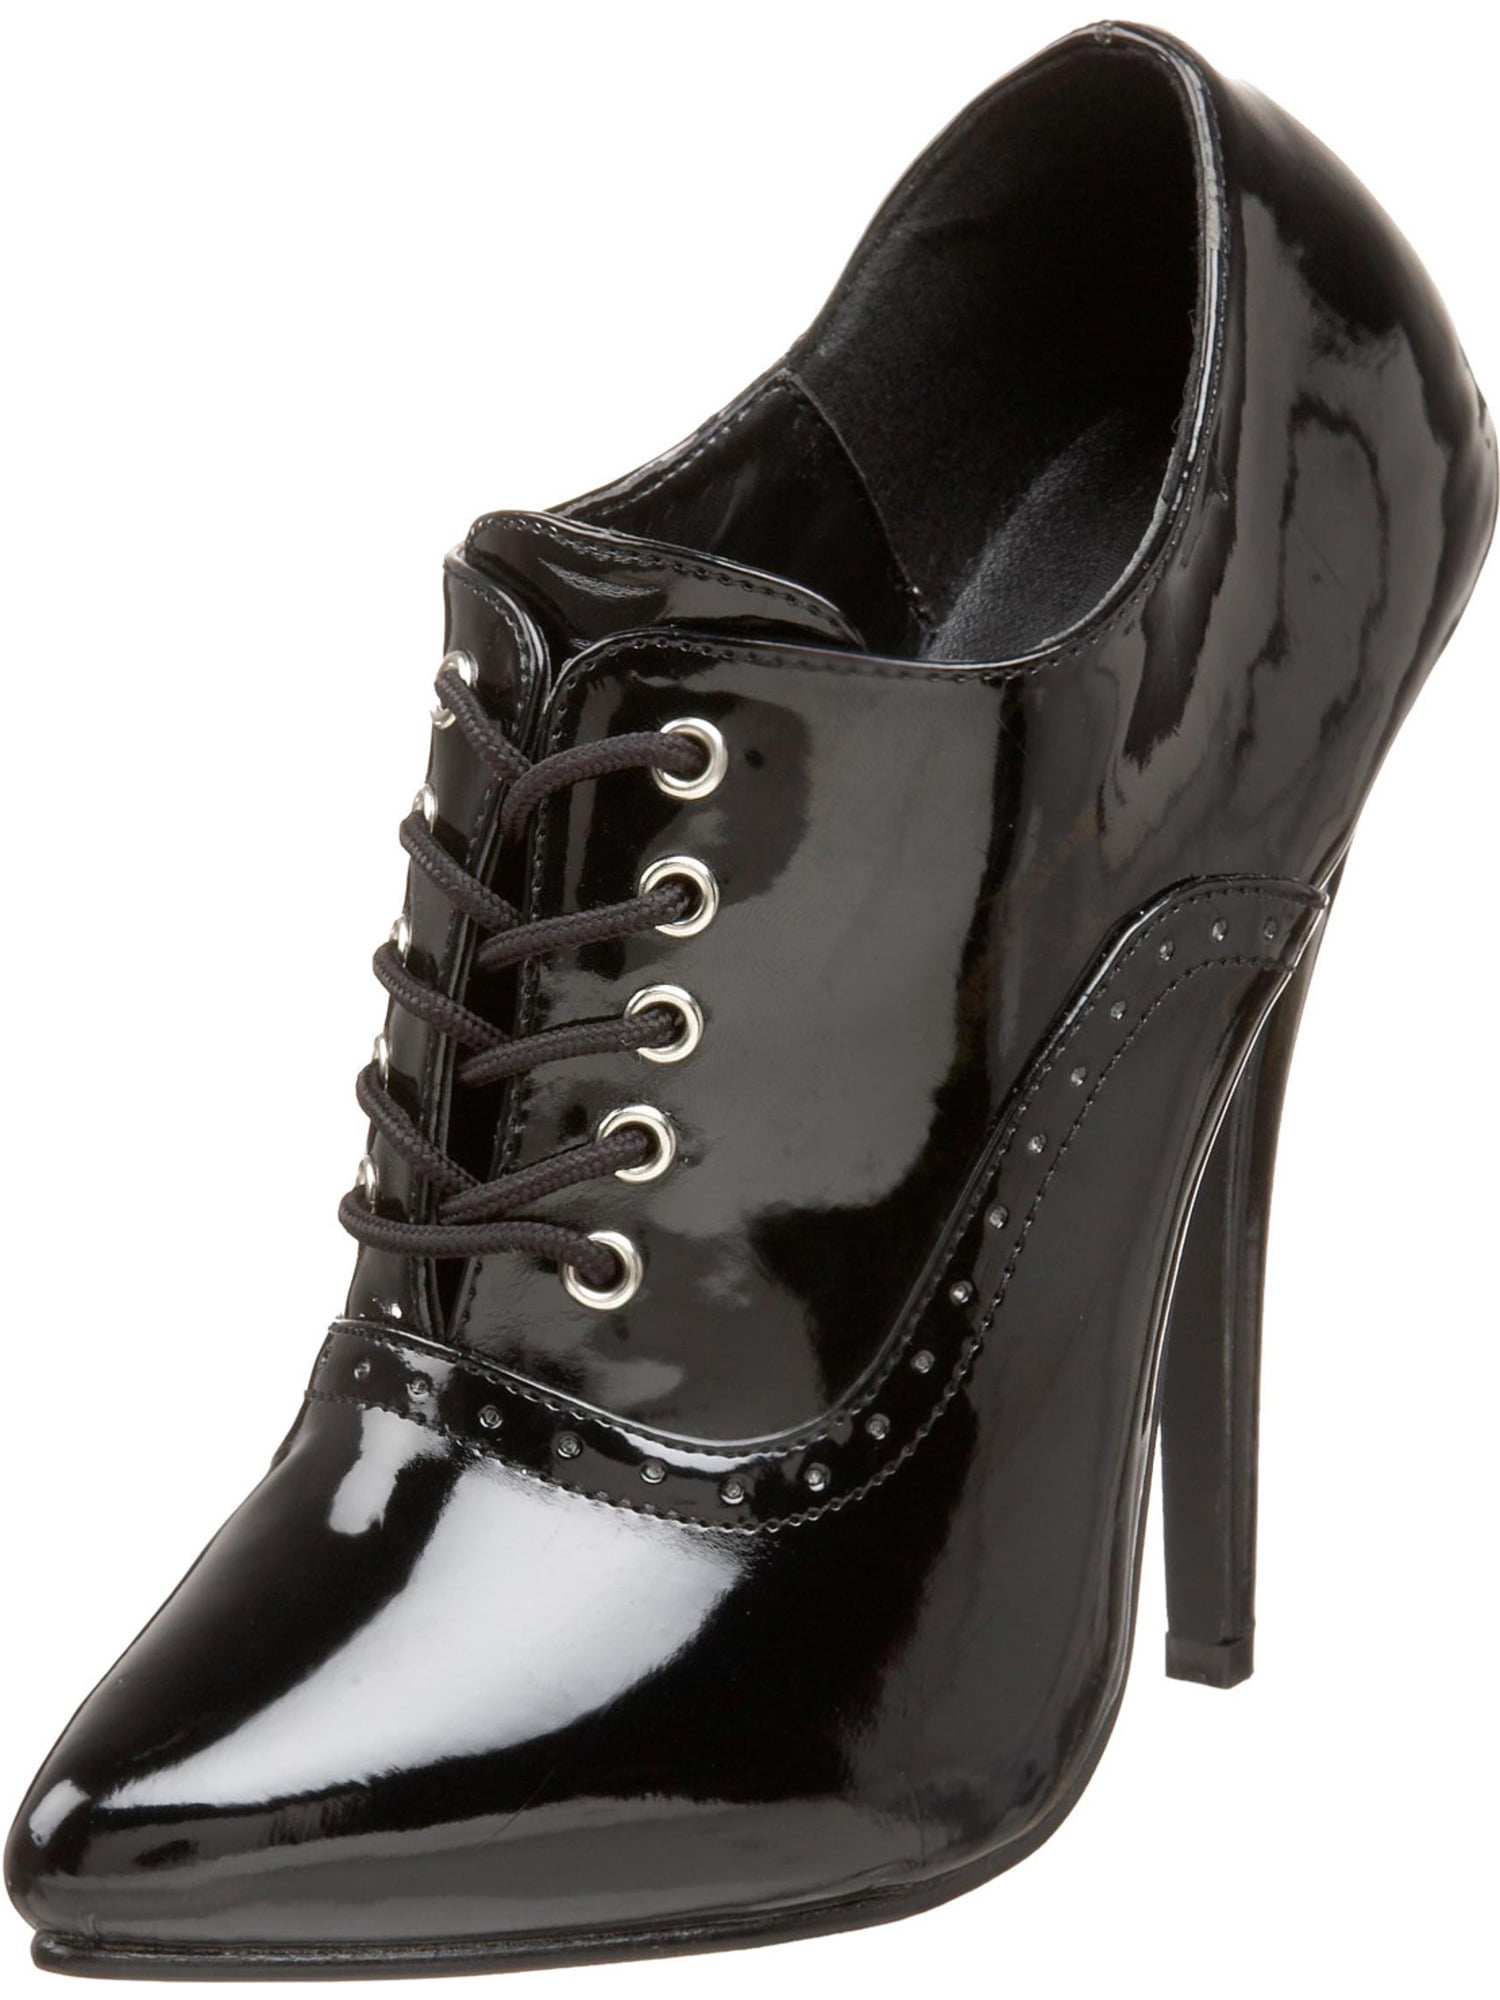 Devious - Black Patent Oxford High Heels with Single Sole and 6 Inch ...